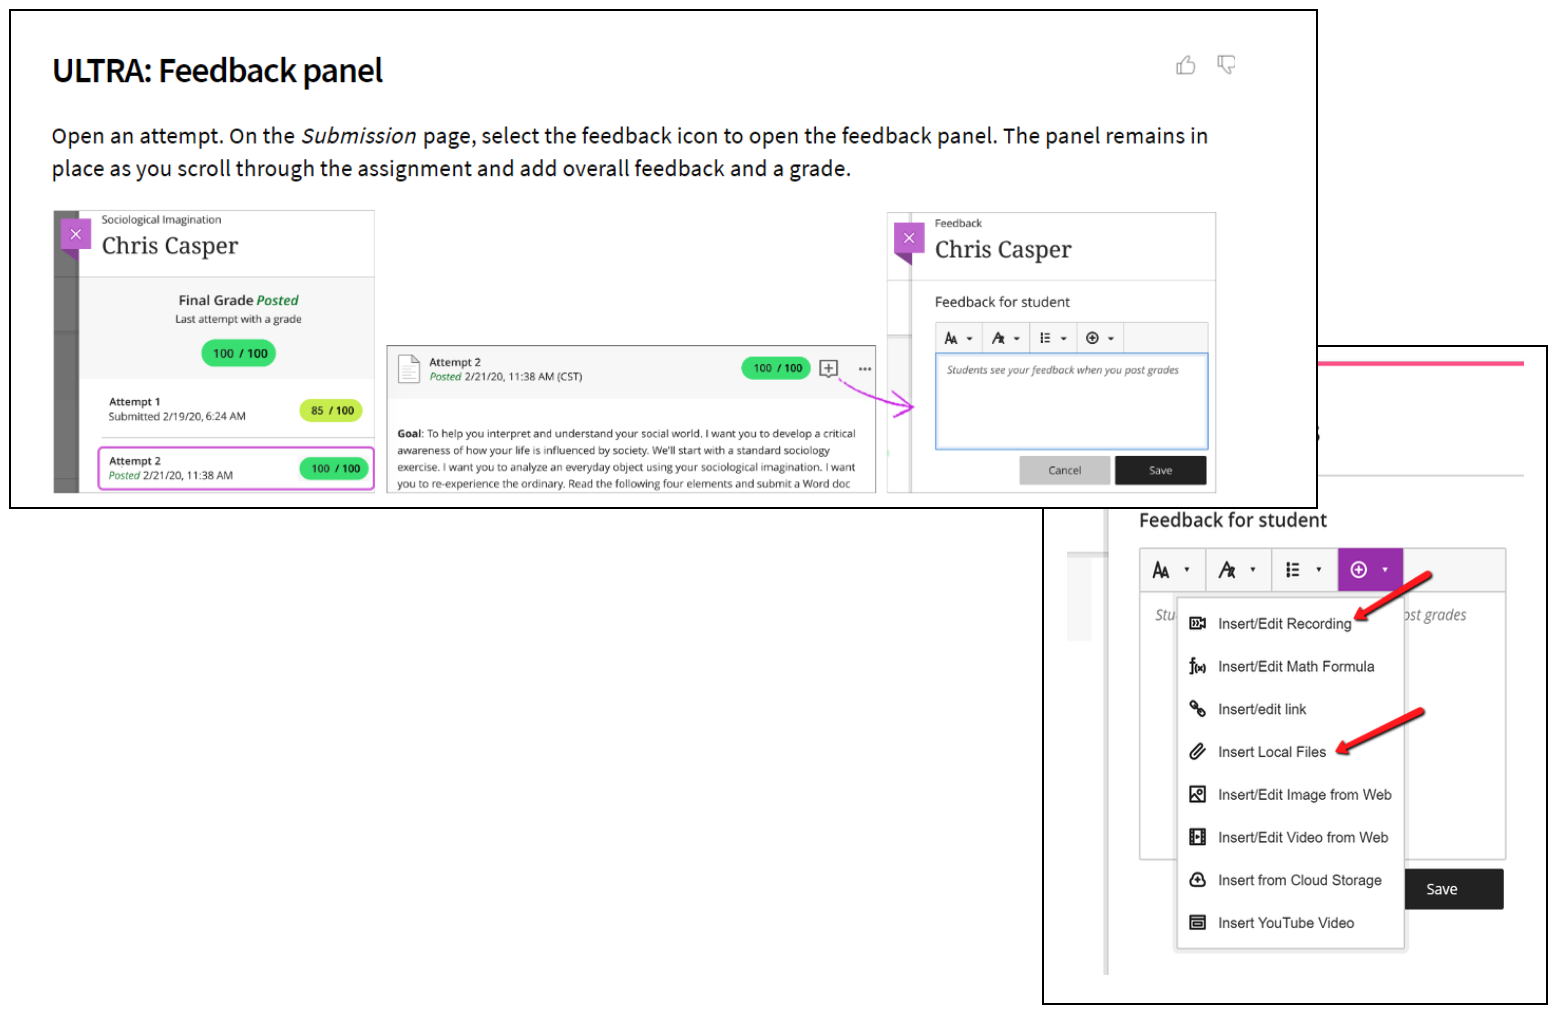 A screenshot showing the overall feedback panel